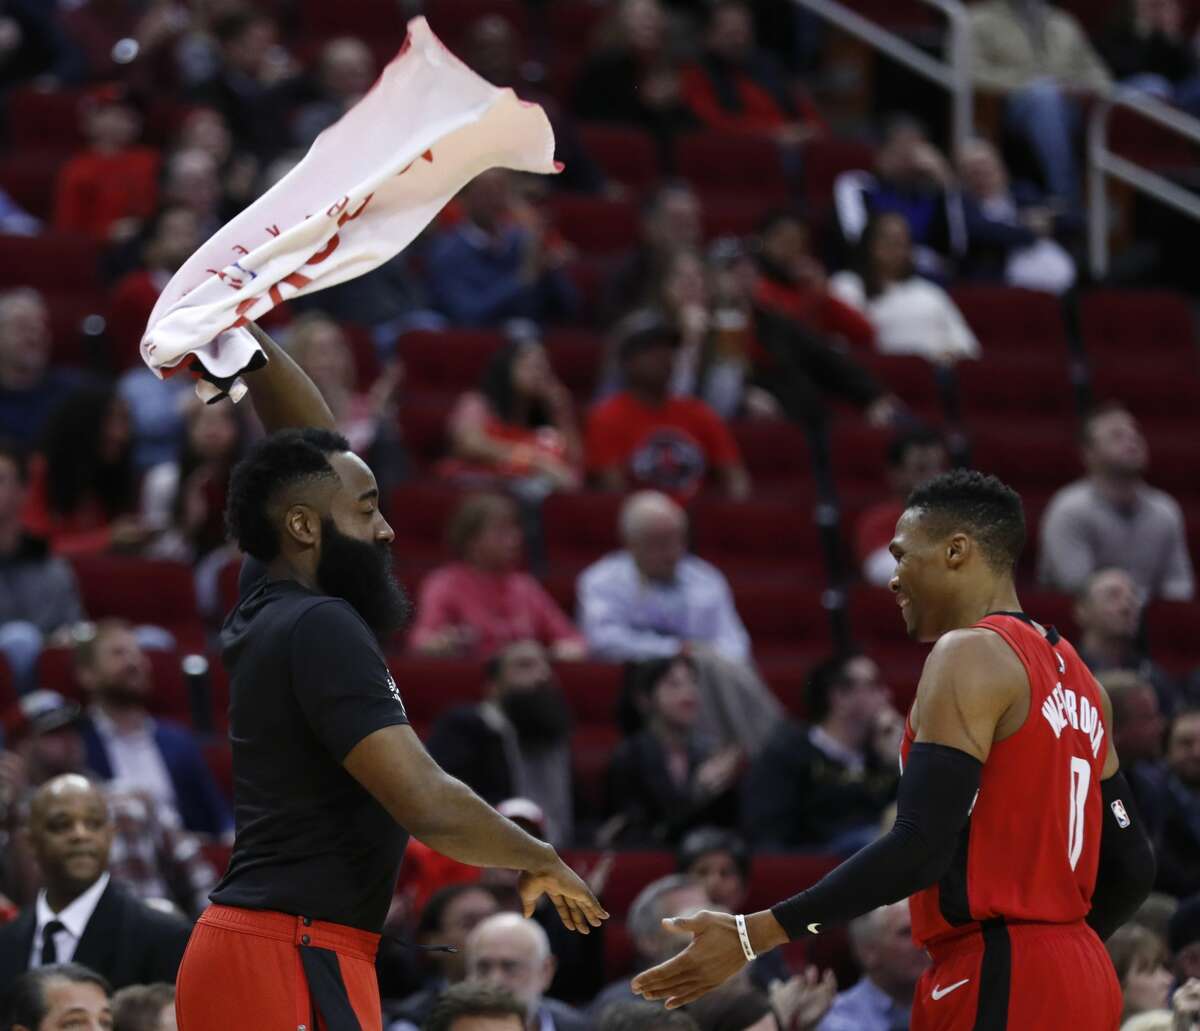 Houston Rockets guard James Harden, left, waves a towel as he slaps hands with guard Russell Westbrook (0) as he comes off the court during the second half of an NBA basketball game against the Memphis Grizzlies on Wednesday, Feb. 26, 2020, at Toyota Center in Houston.